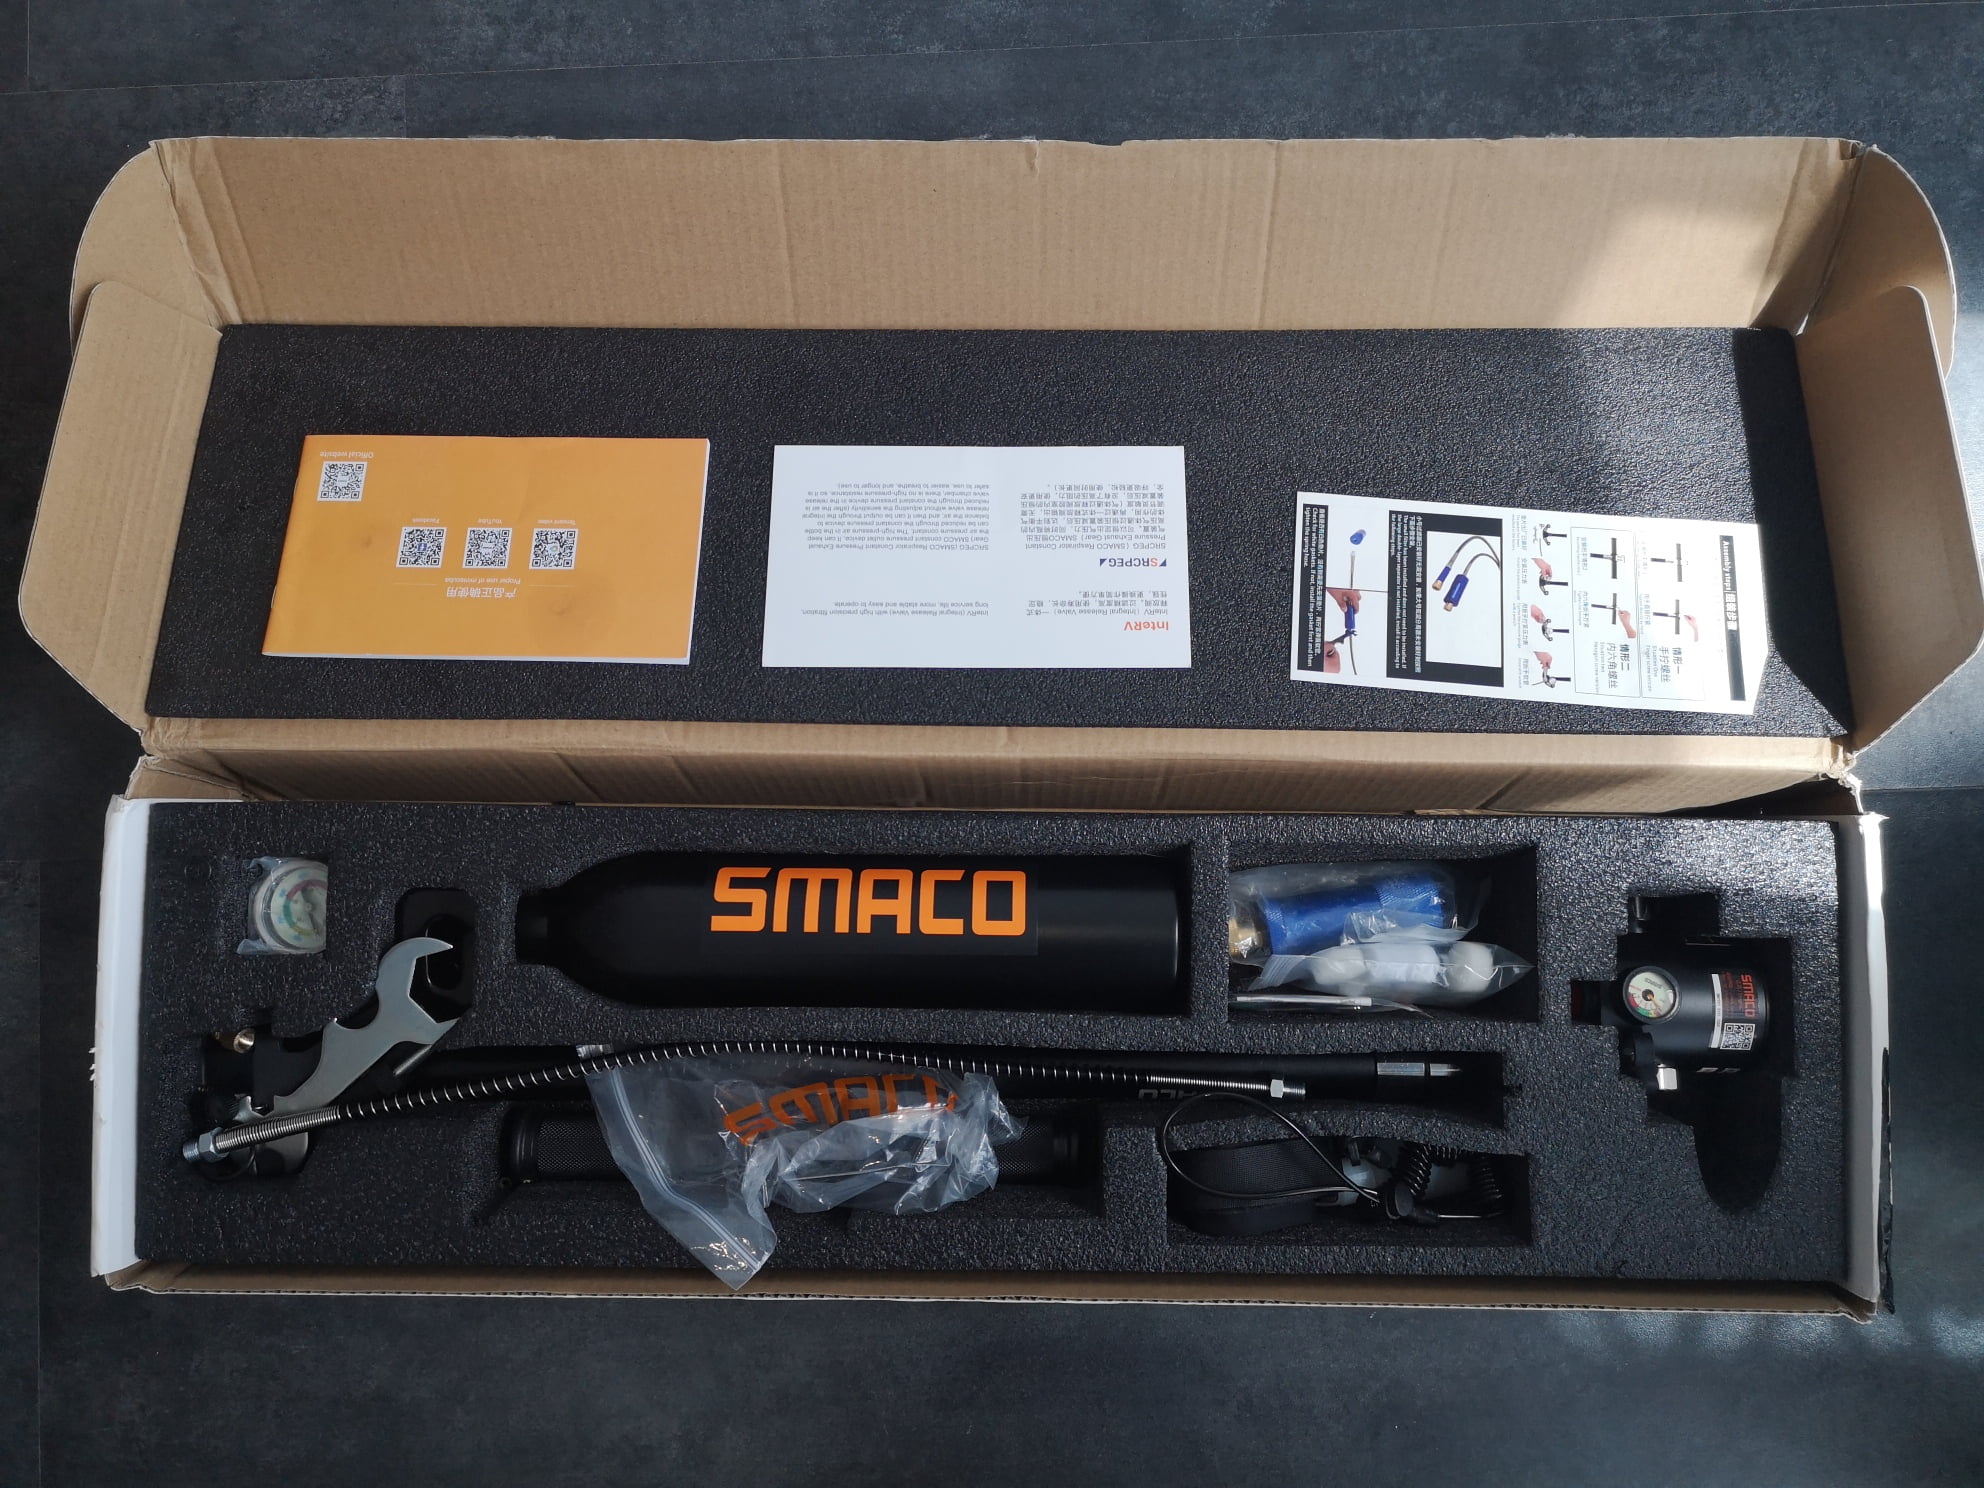 Unboxing Smaco S300 +